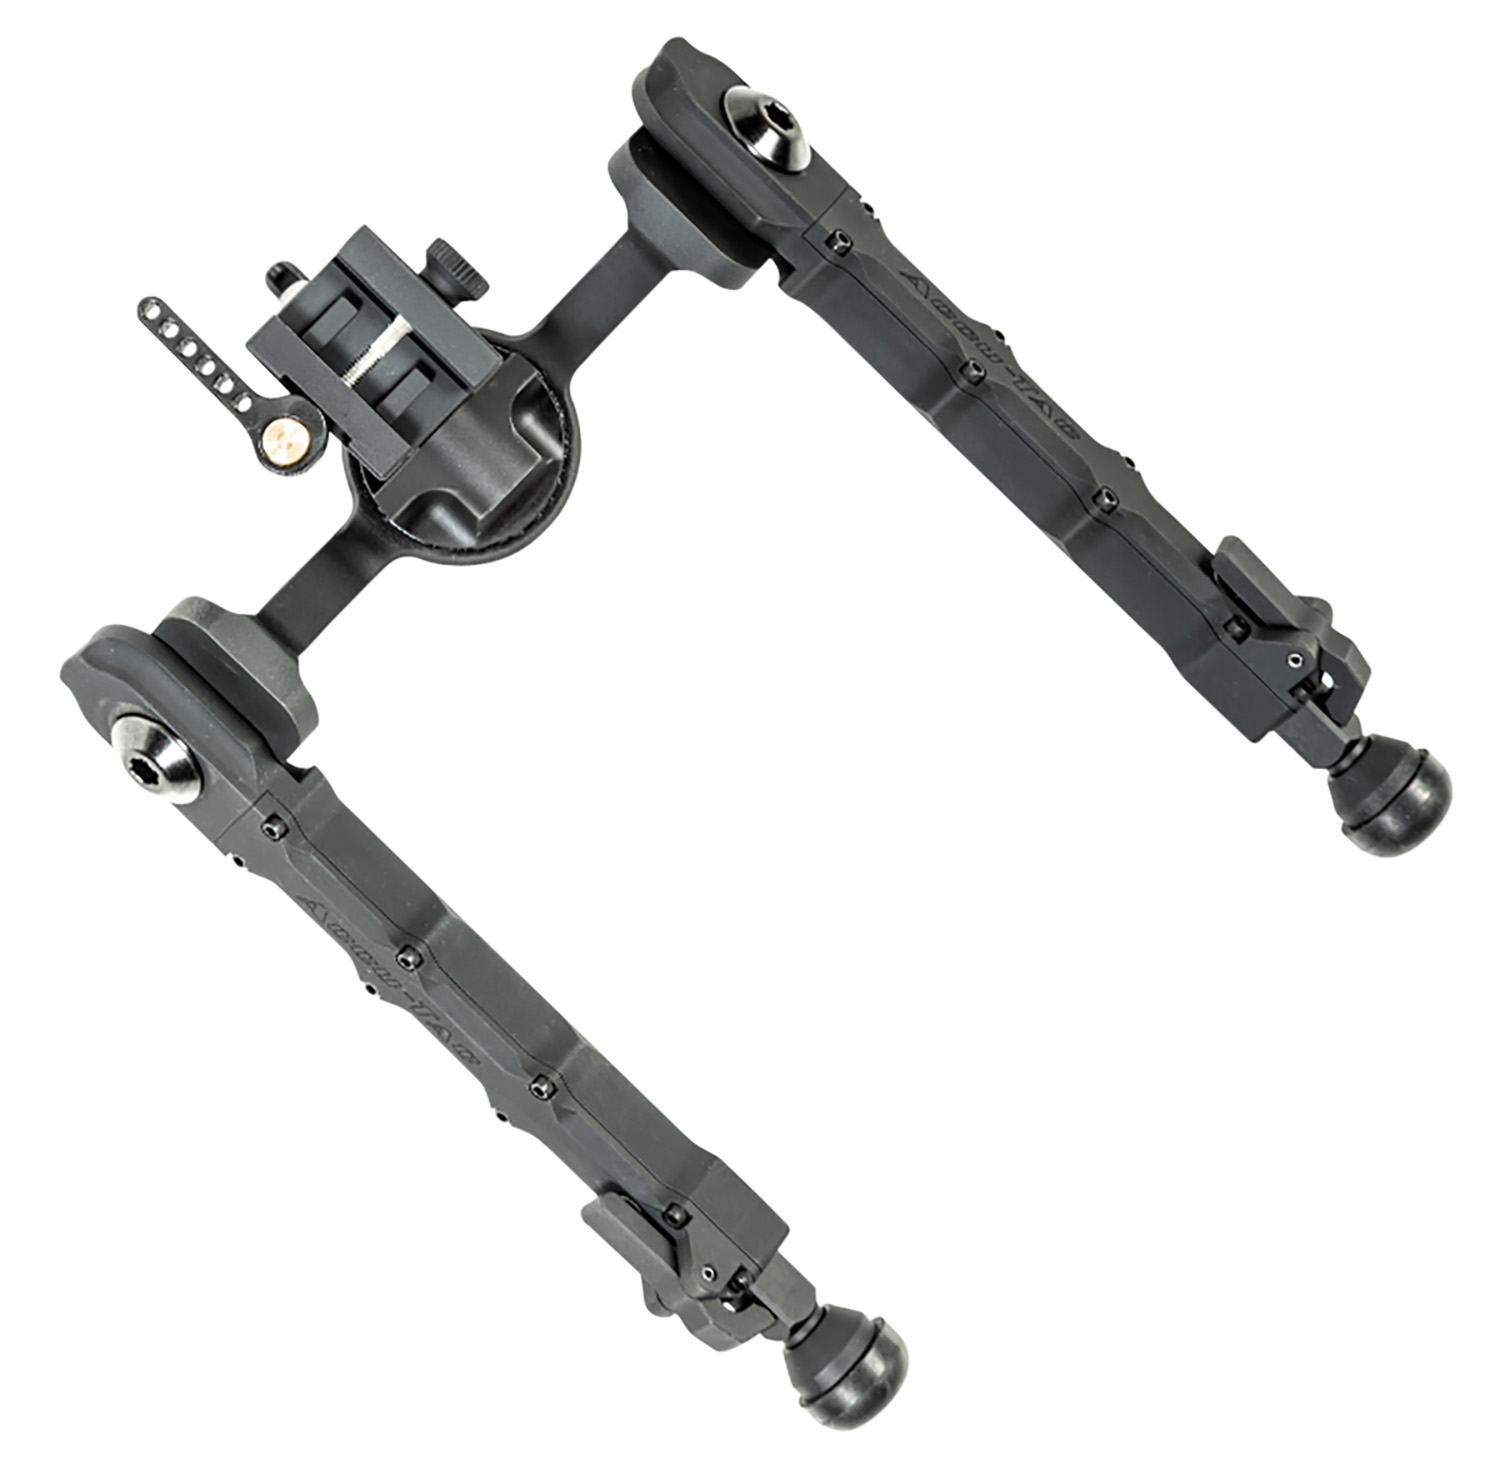 Accu-Tac FCSRBG200 FC-5 G2 Bipod made of Black Hardcoat Anodized Aluminum with Picatinny Attachment, Steel Feet & 6